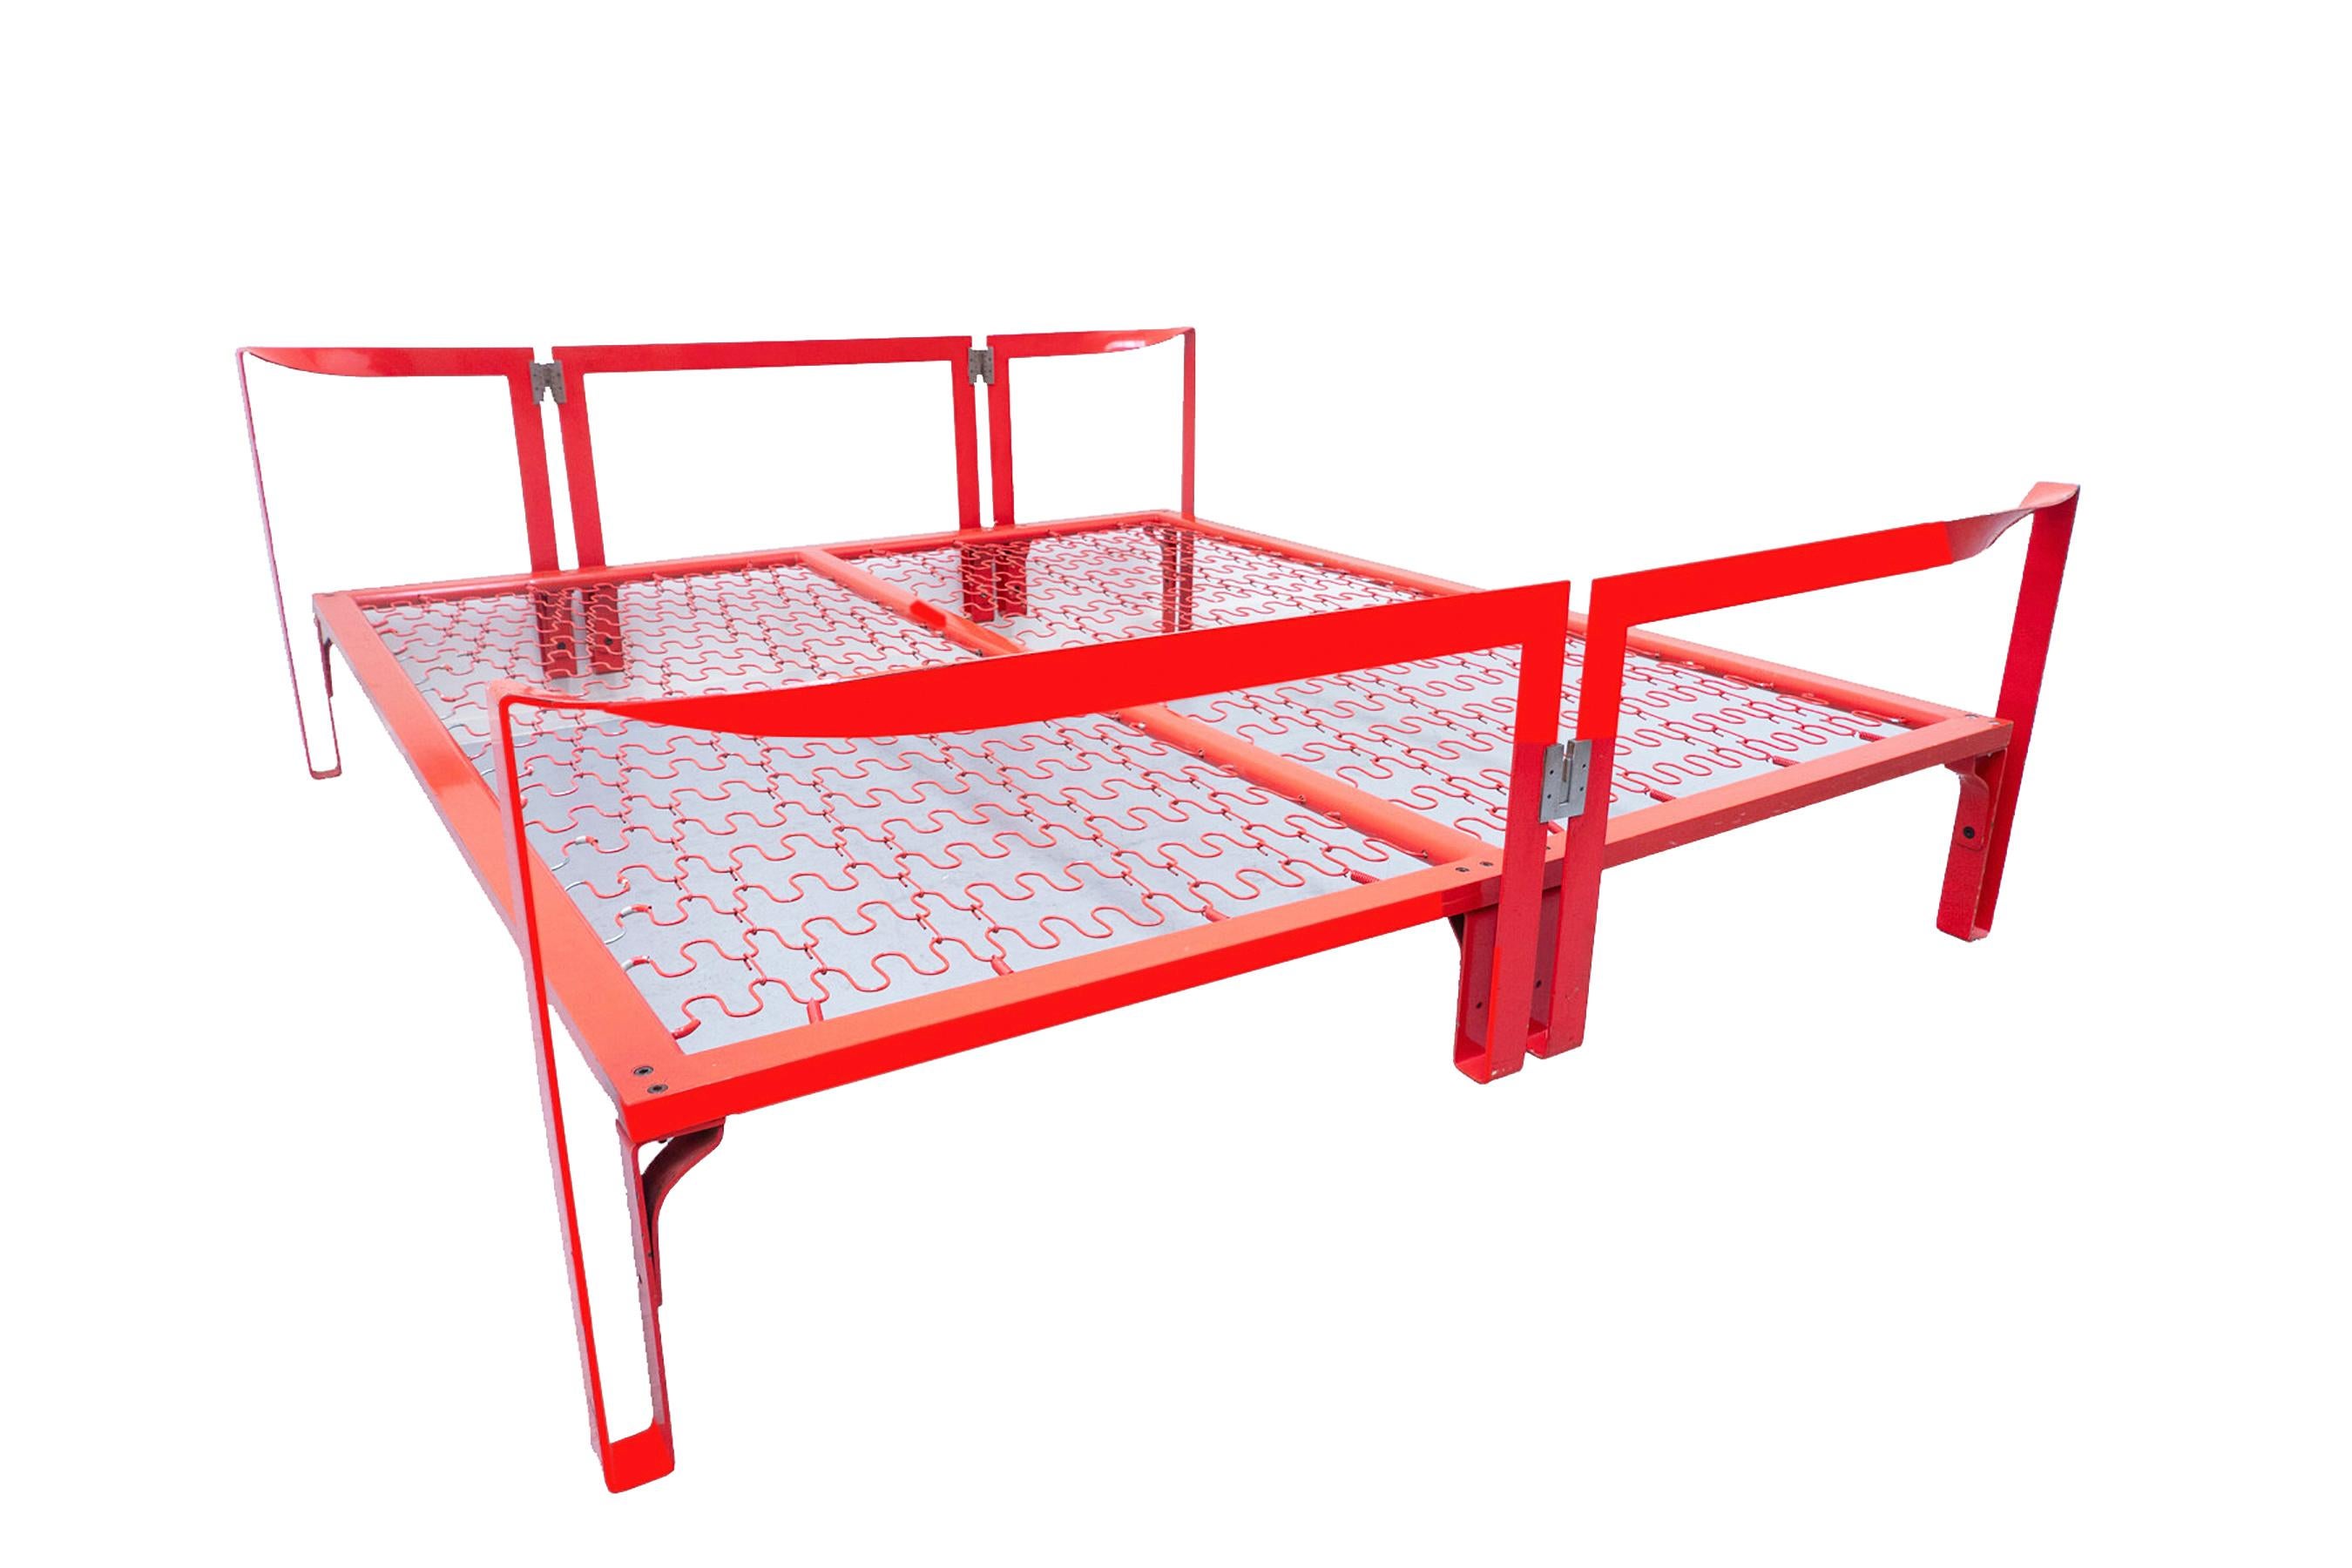 Vanessa double bed in curved red lacquered metal designer Tobia Scarpa for Gavina
Tobia Scarpa worked for much of his career alongside his wife Afra Bianchin (Montebelluna, March 28, 1937 - Trevignano, July 30, 2011). Their work can be found in many